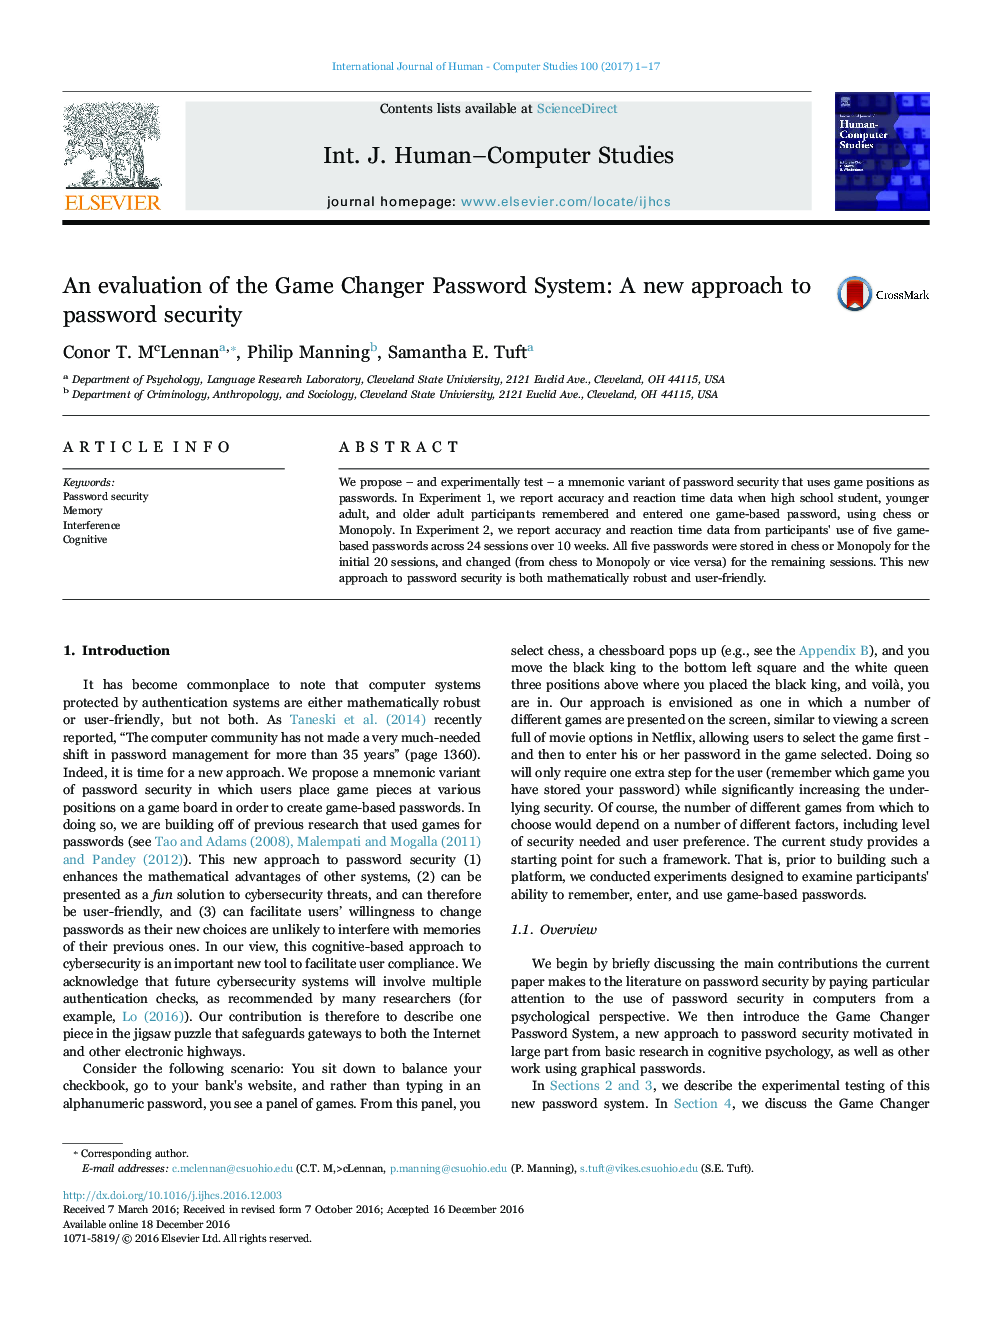 An evaluation of the Game Changer Password System: A new approach to password security